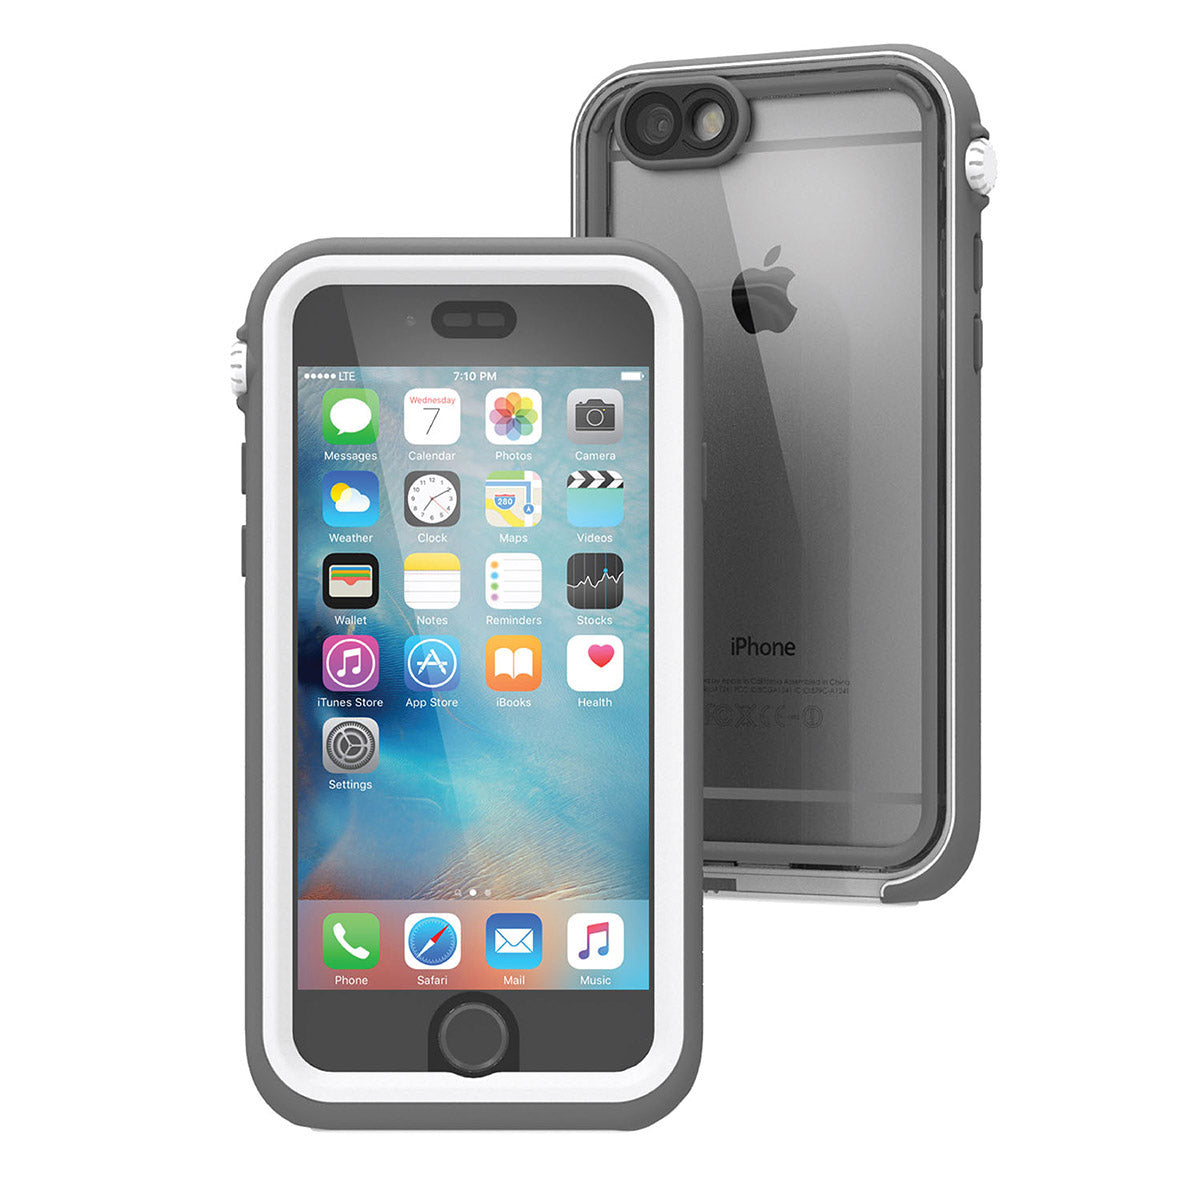 Catalyst iphone 6s waterproof case showing front and back view of the case in white & mist gray colorway